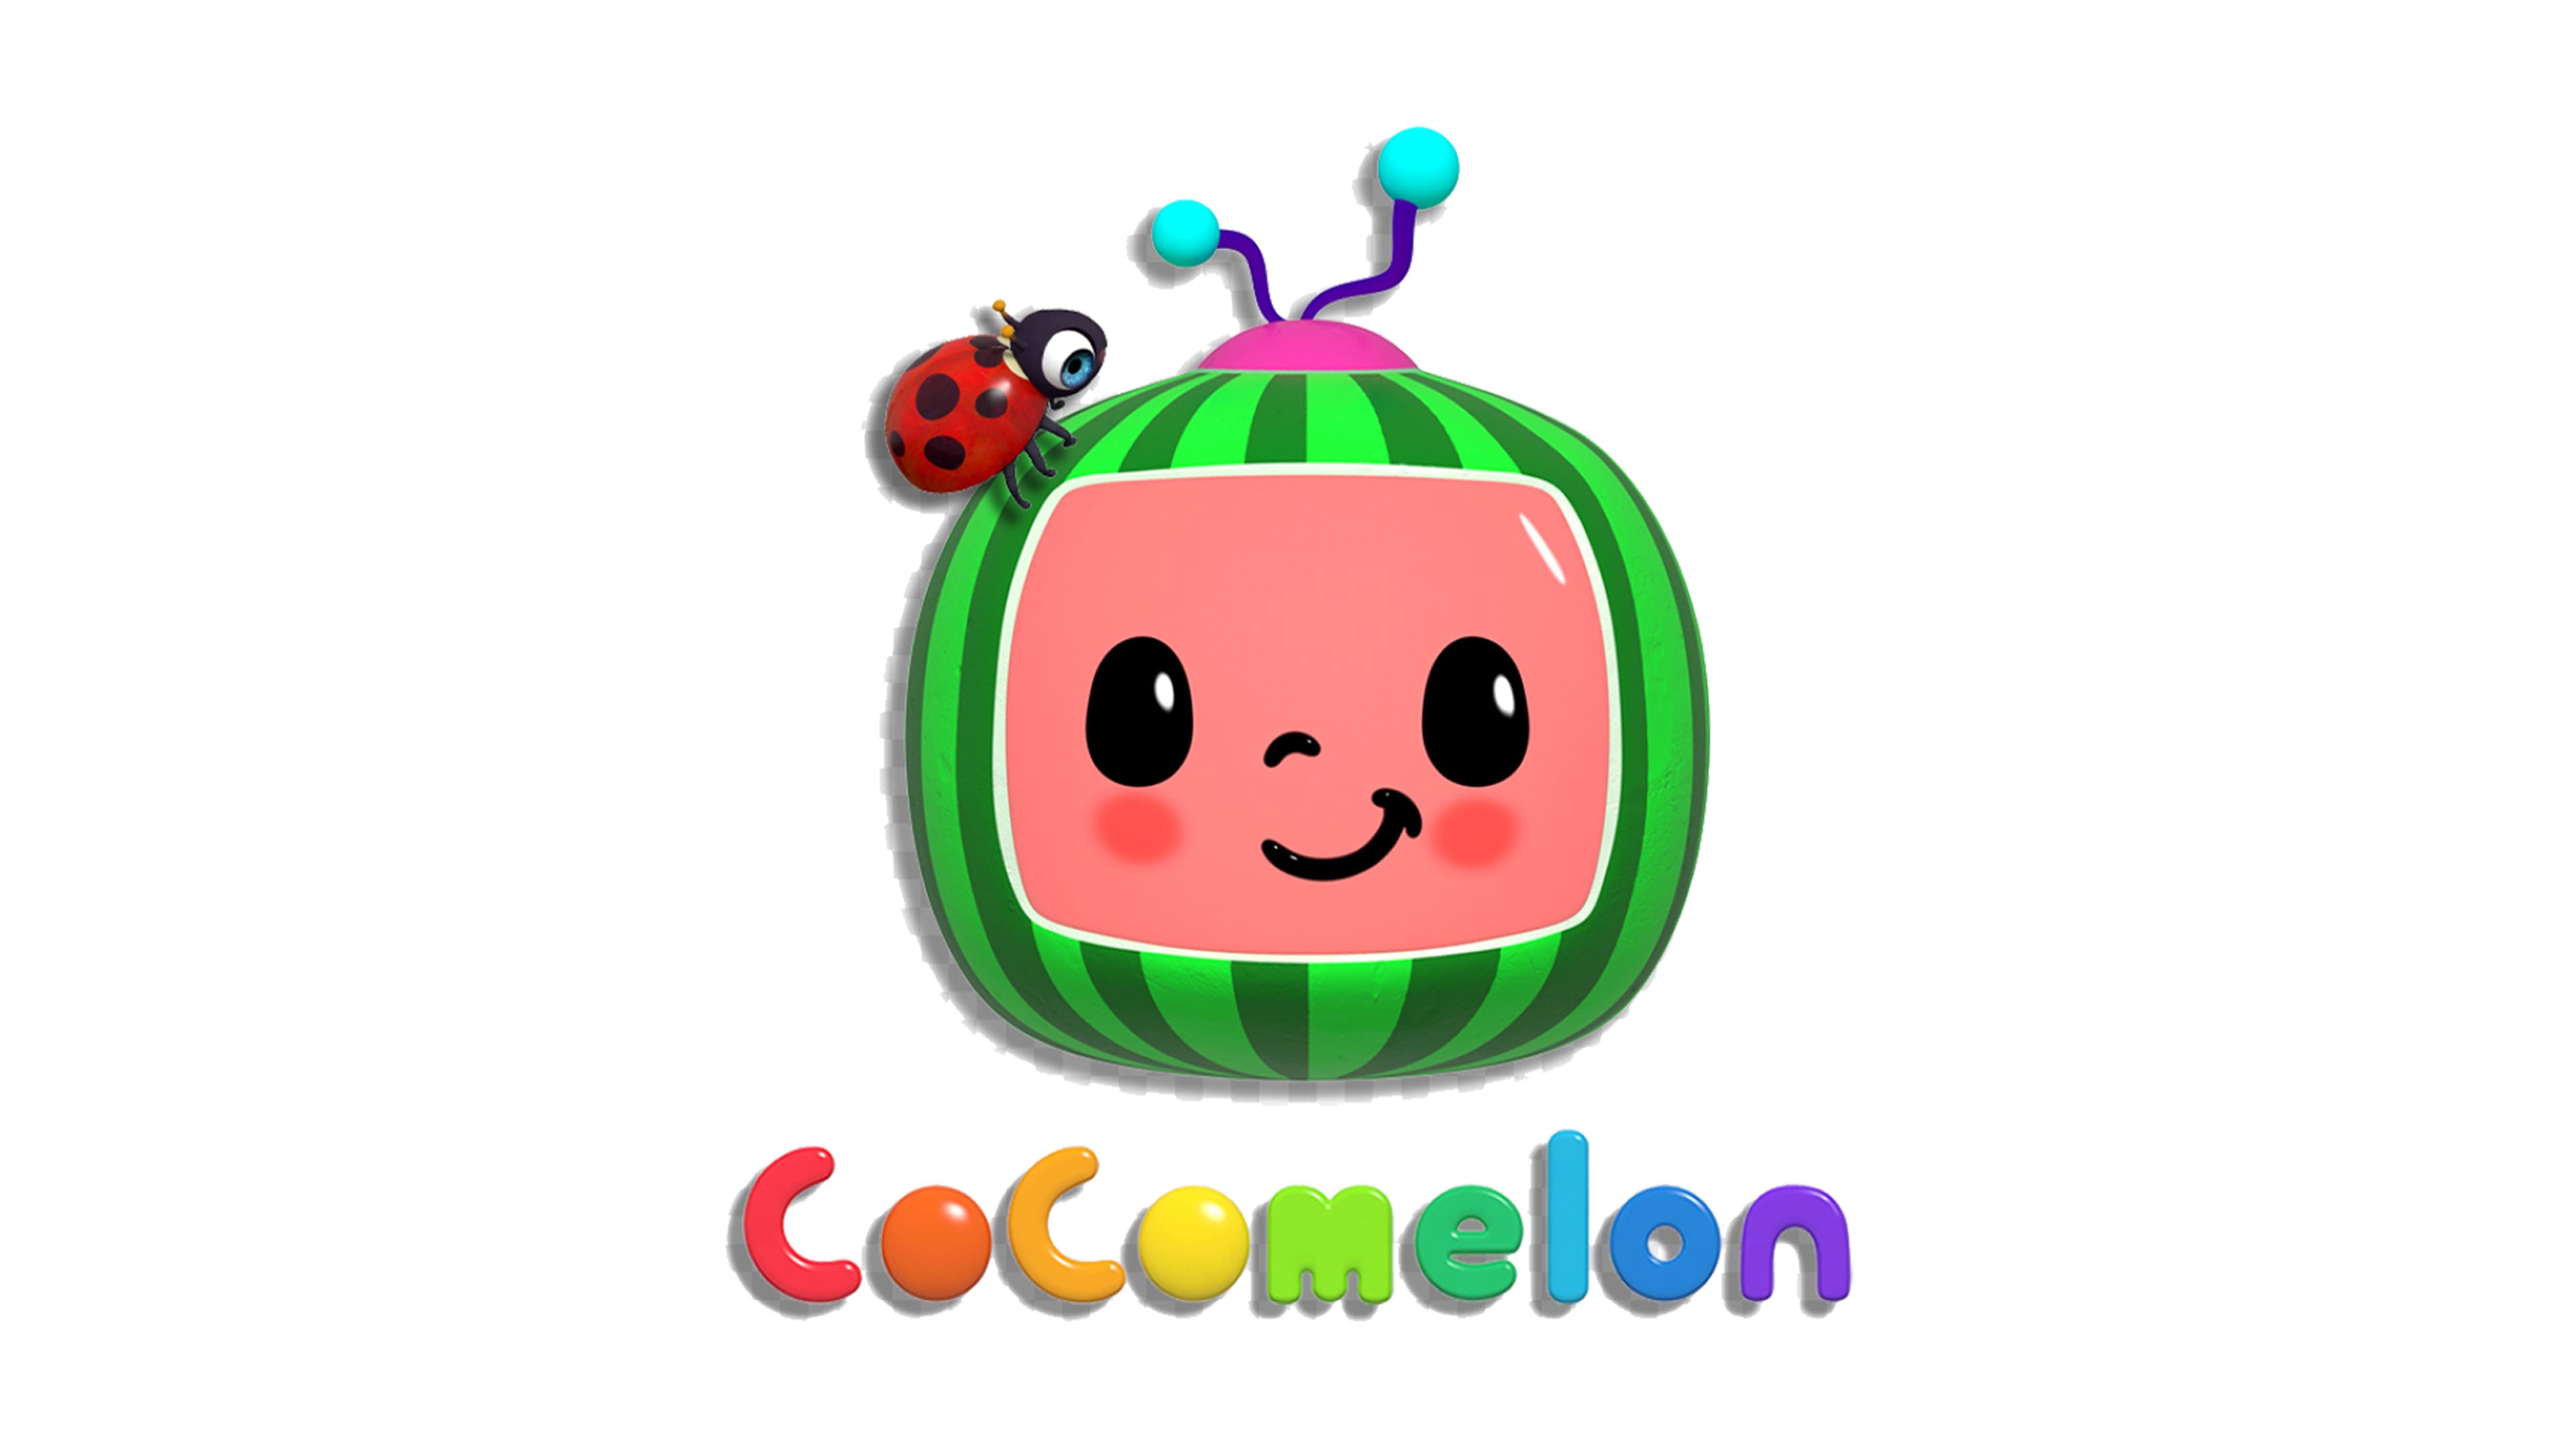 The Cocomelon name was introduced in 2018 along with the new logo of the ch...